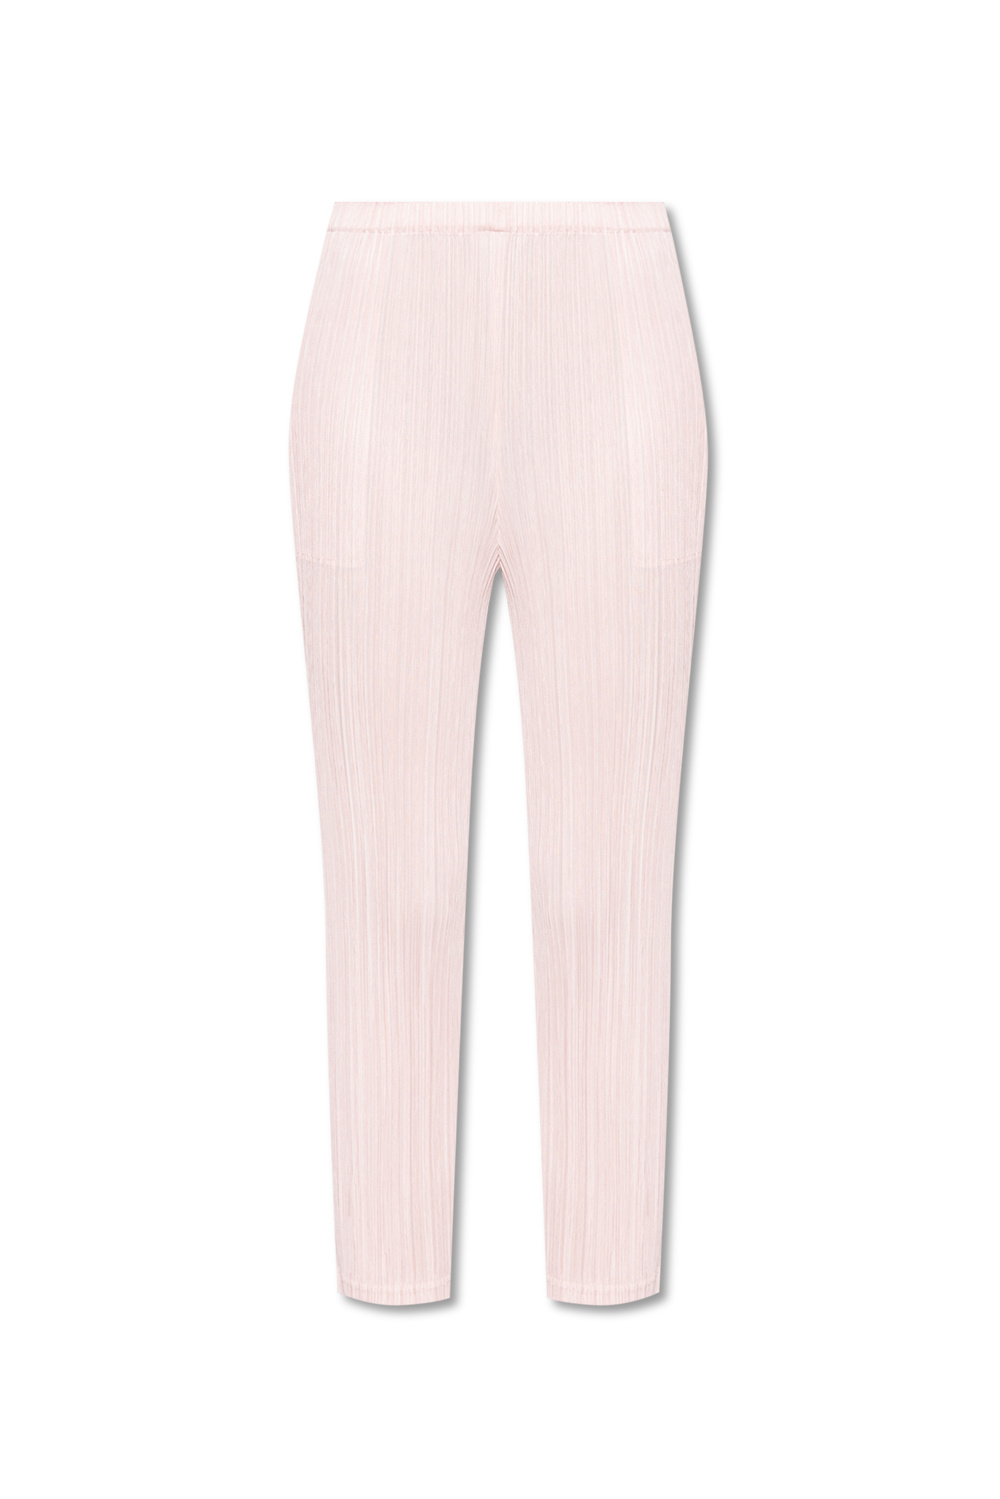 Girl Barely Pink Ballet Legging by Janie and Jack